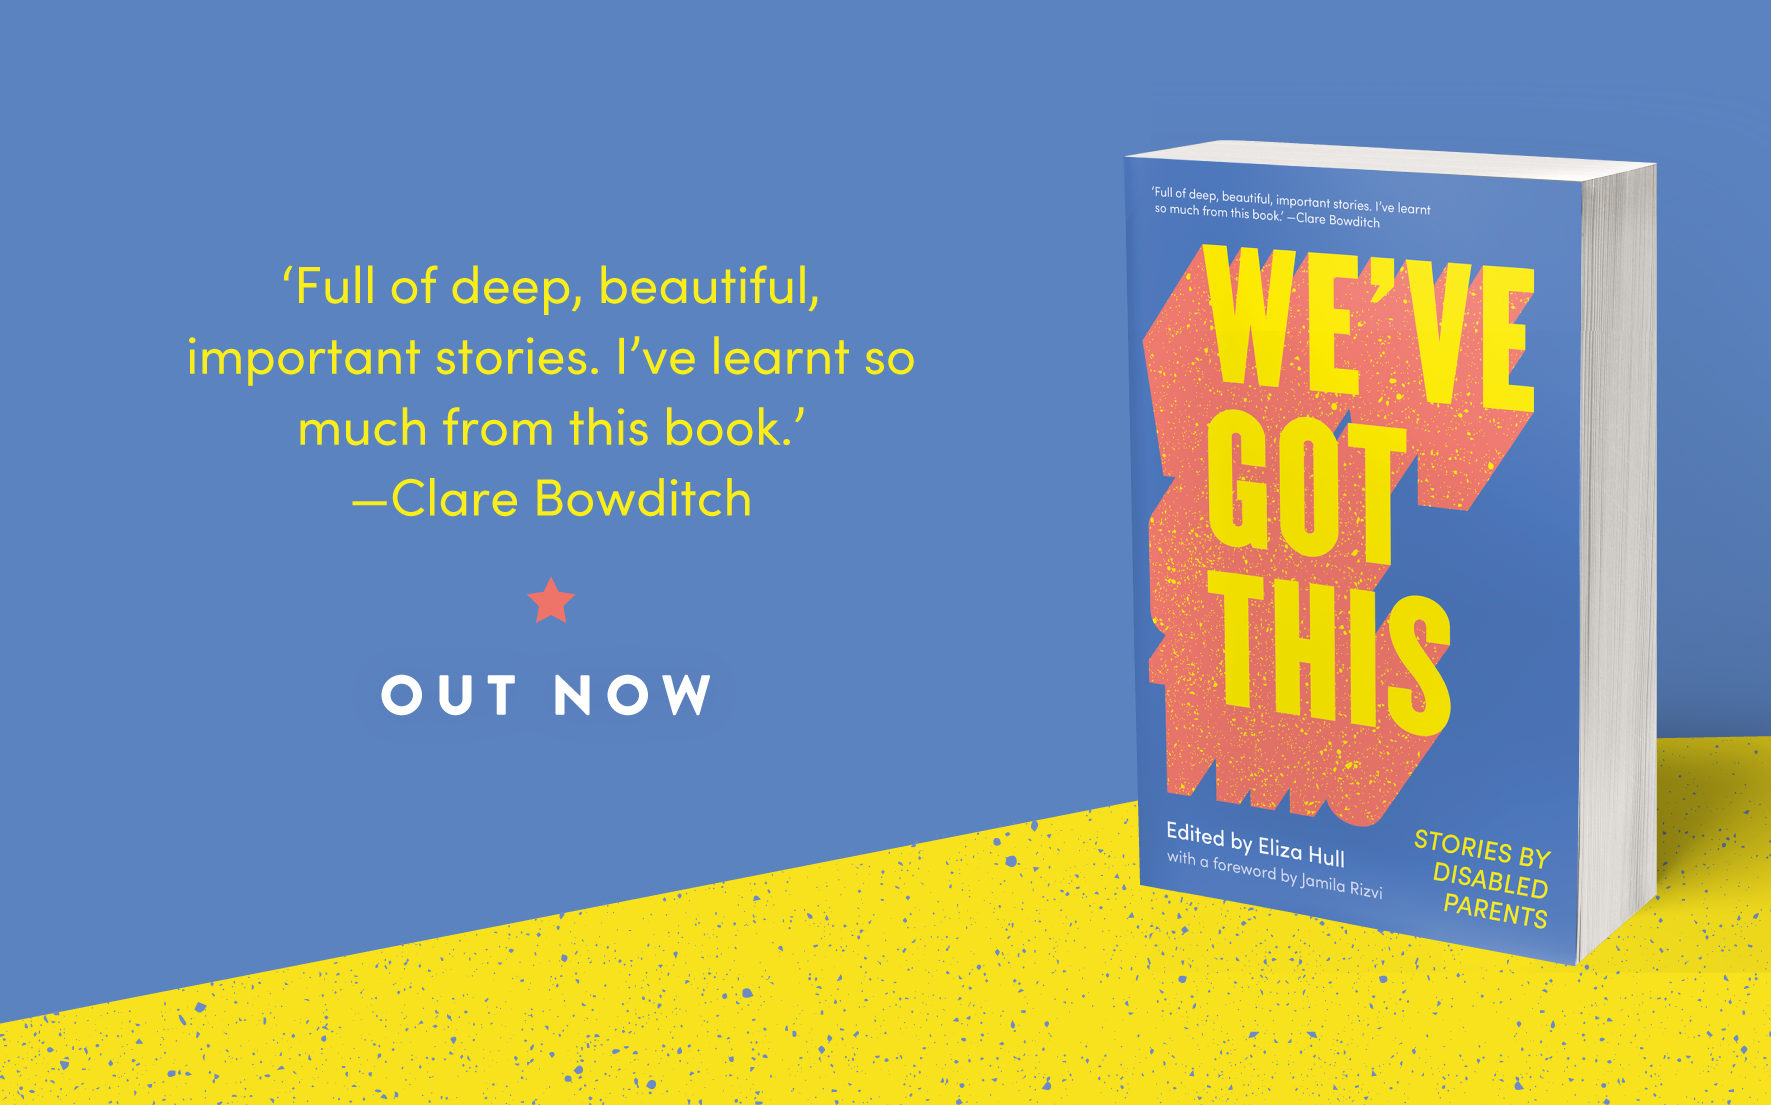 Out Now: We've Got This